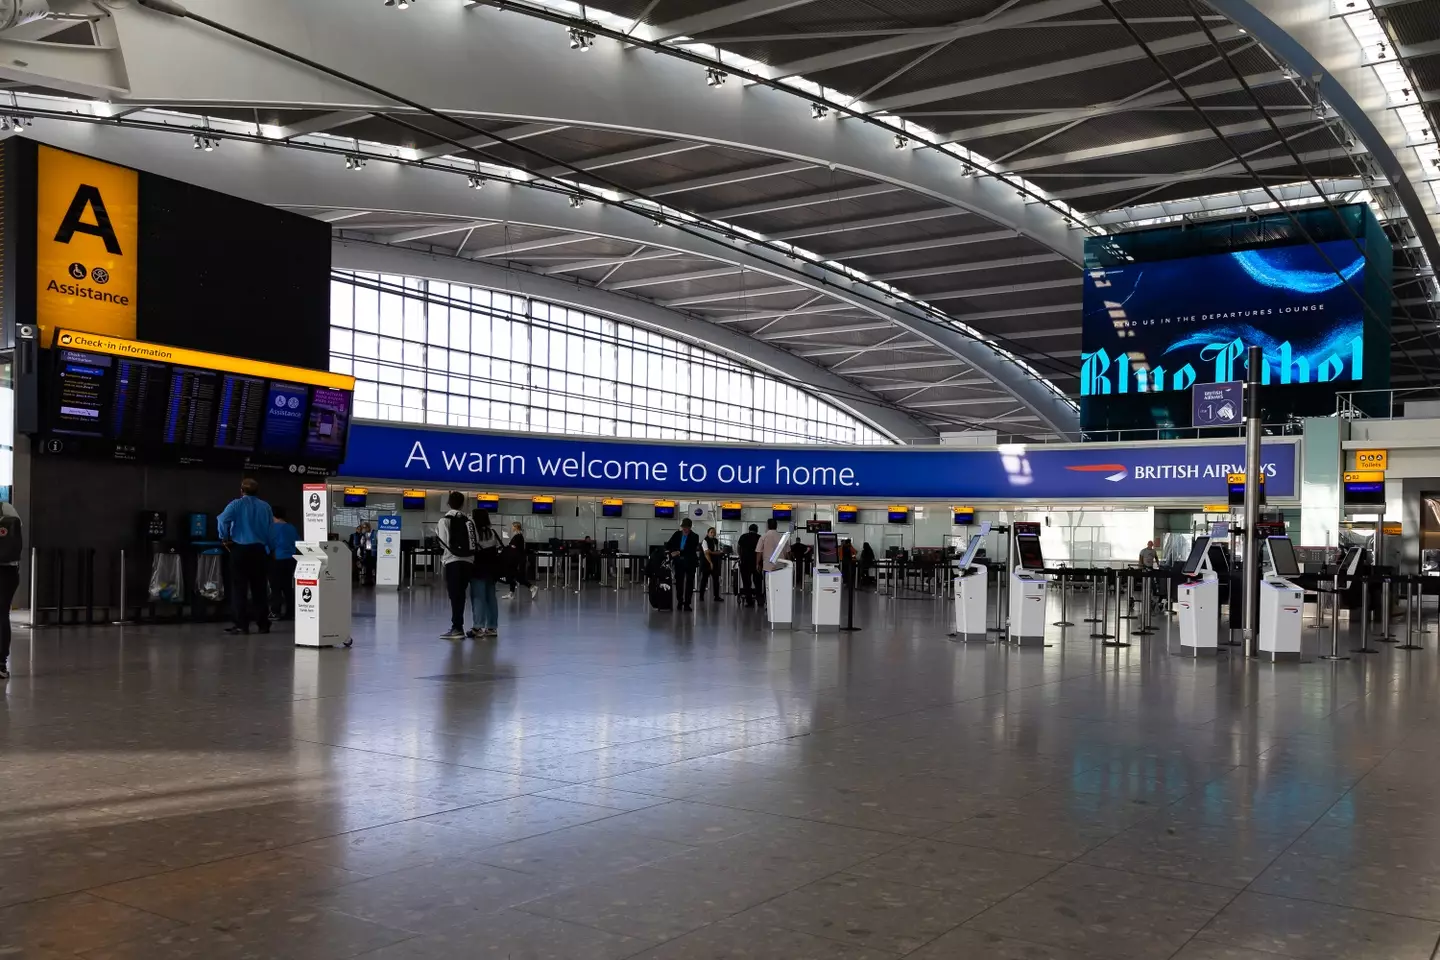 Heathrow Airport said they were supporting the investigation after a man was arrested and charged.